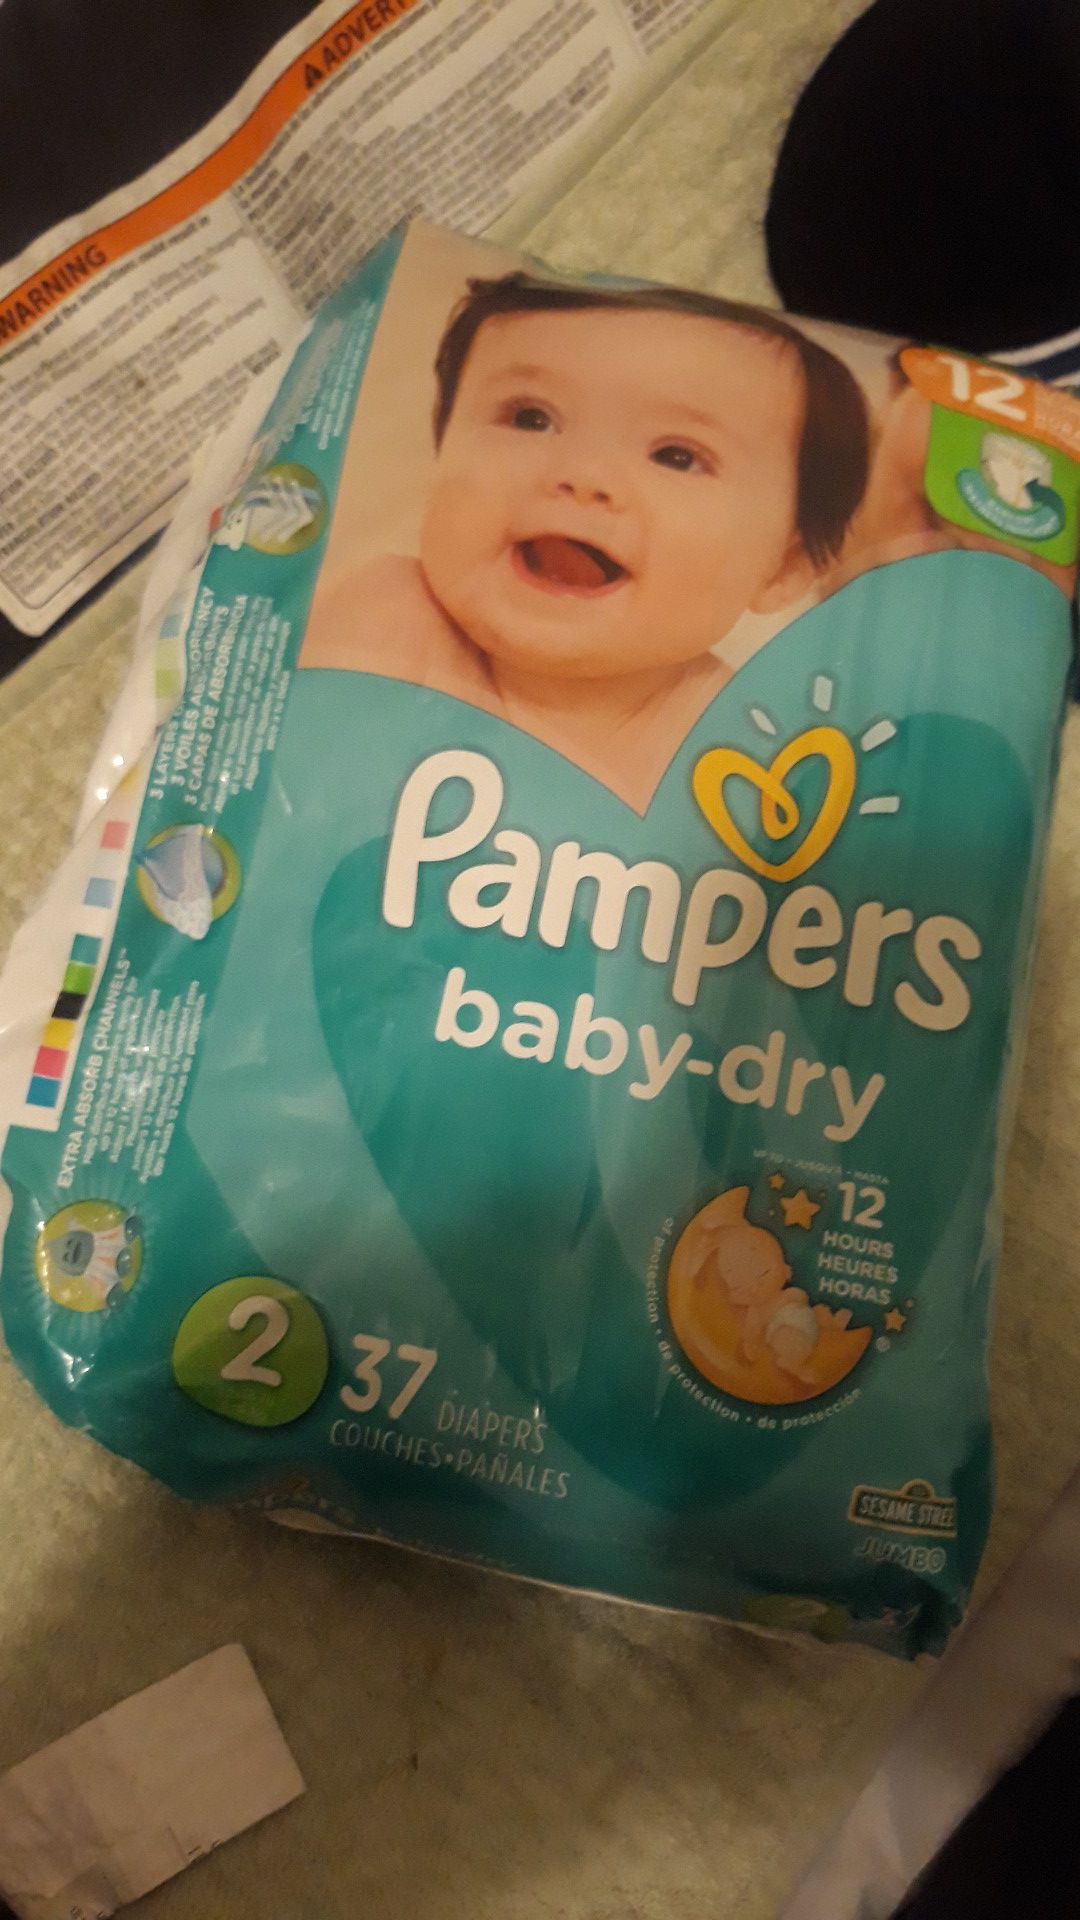 Pampers 37 diapers